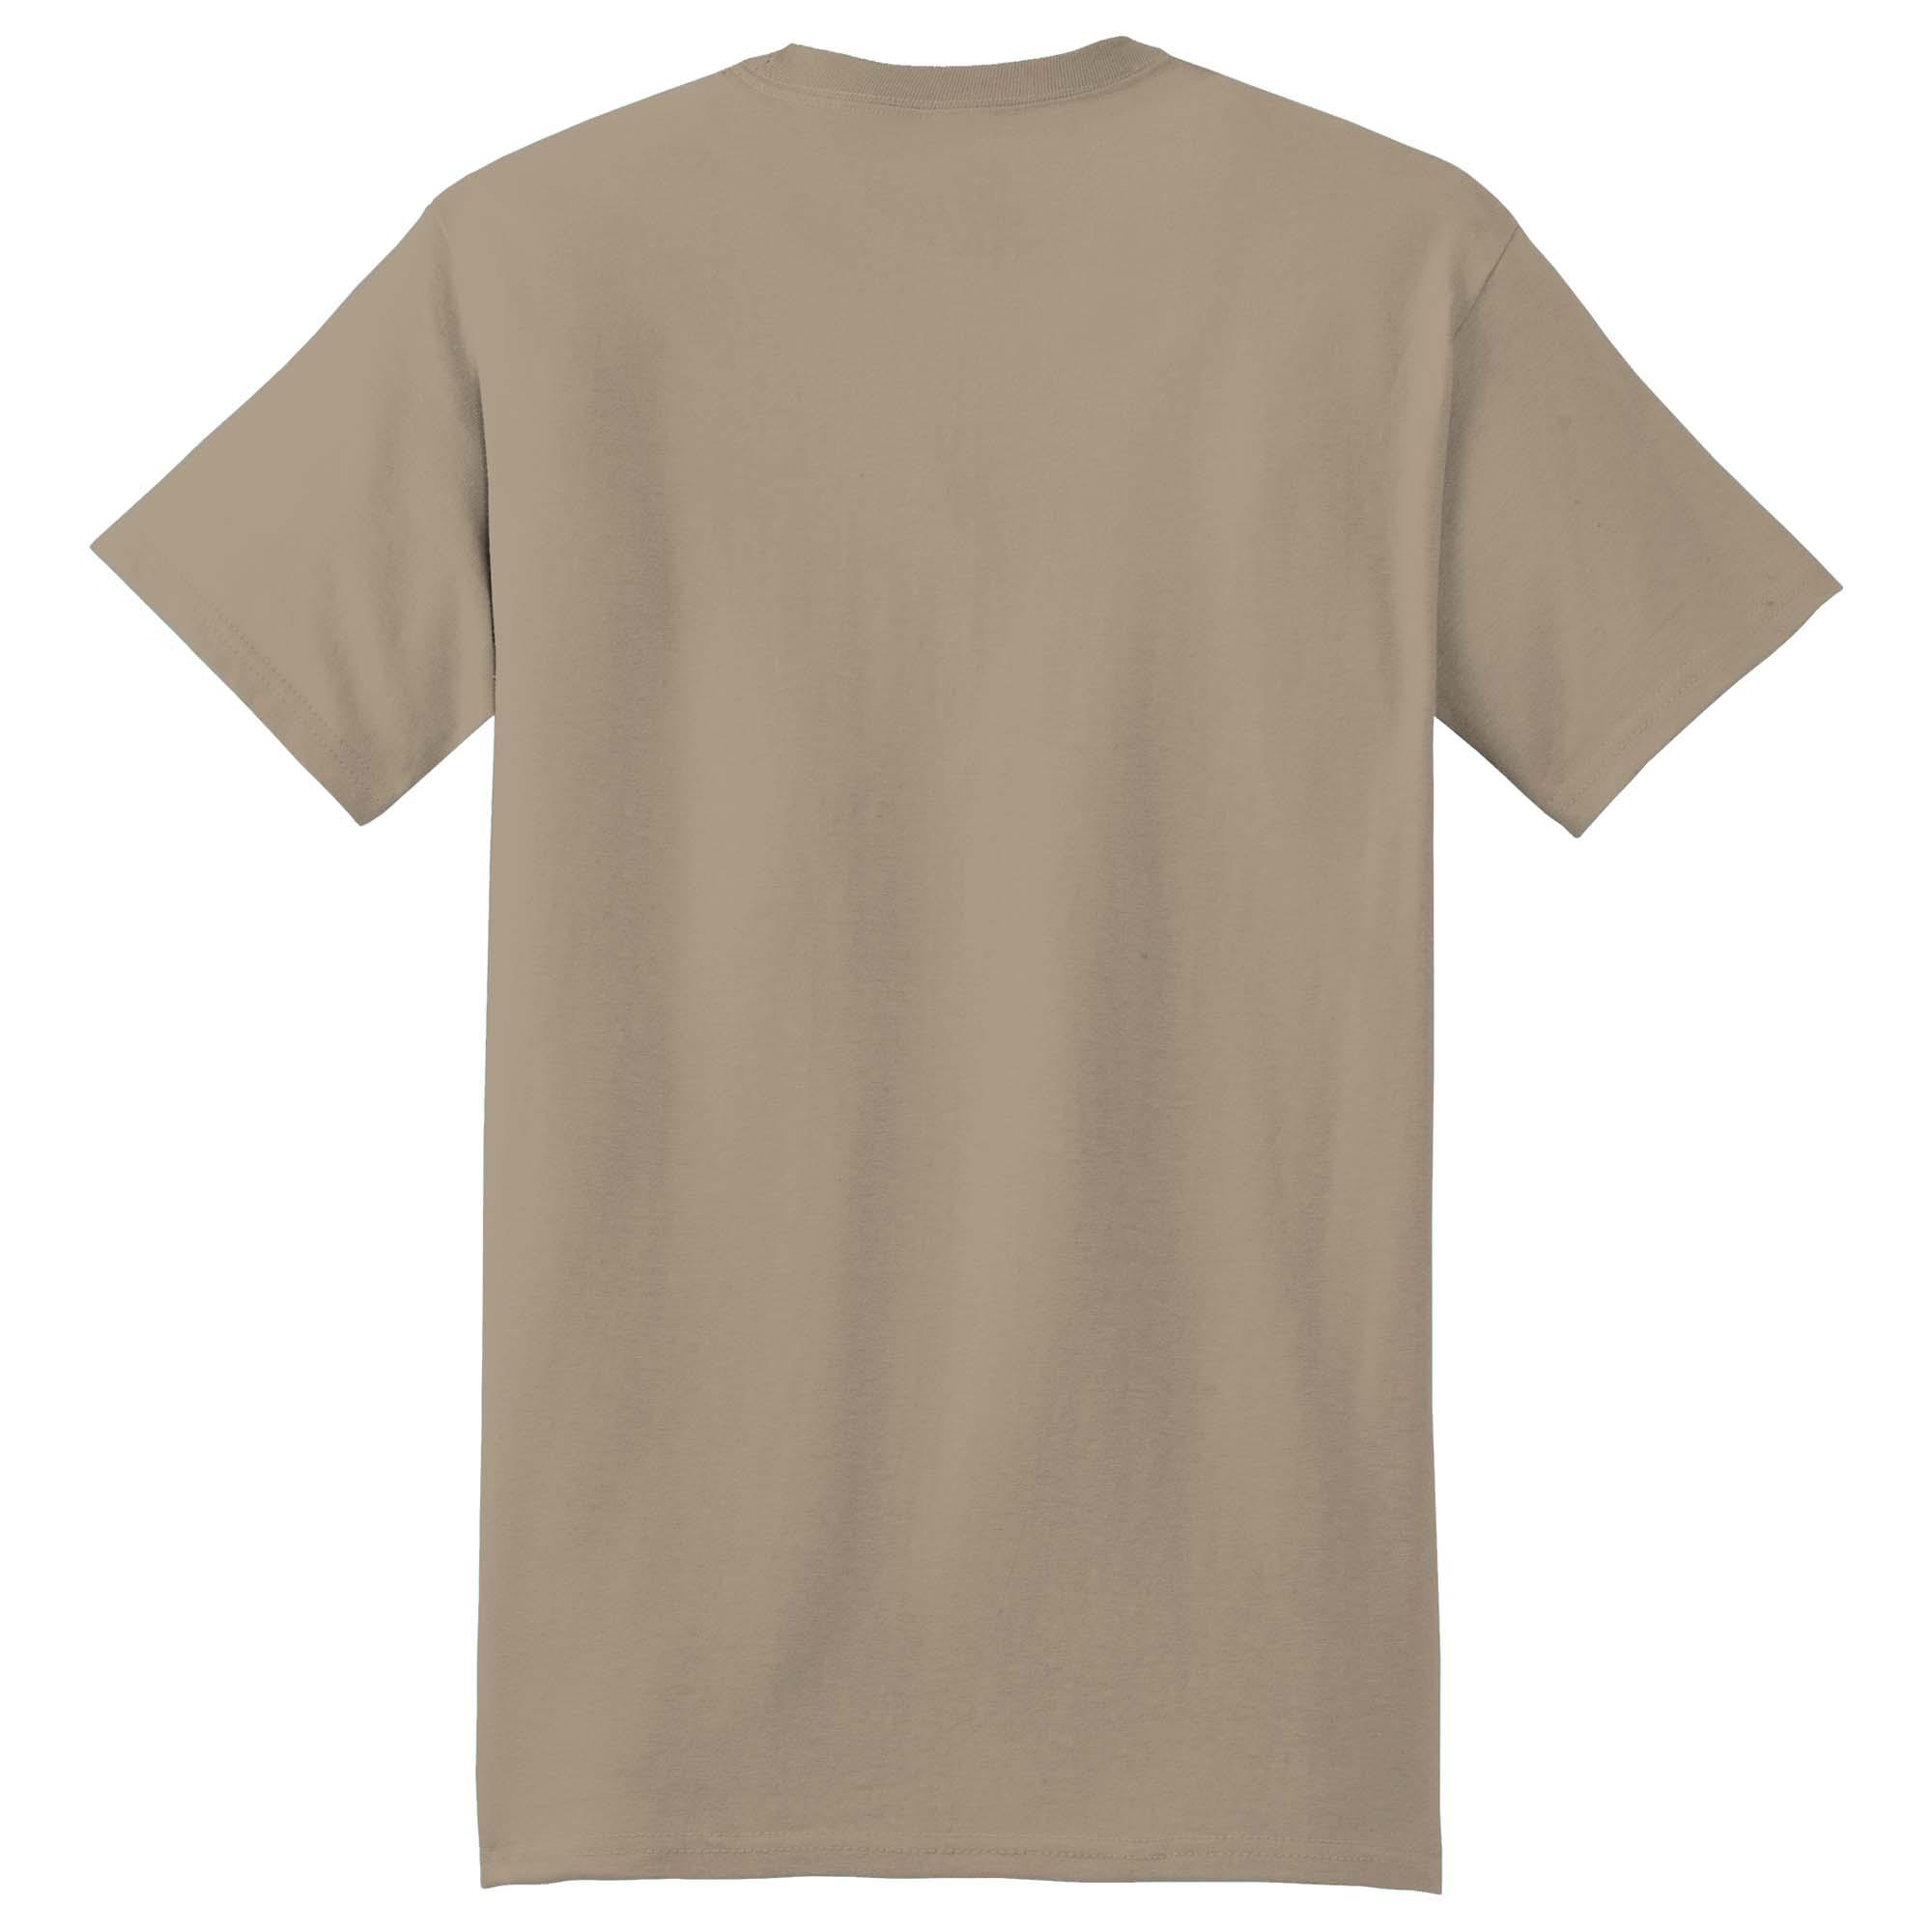 Hanes 5180 Beefy-T 100% Cotton T-Shirt - Pebble | Full Source